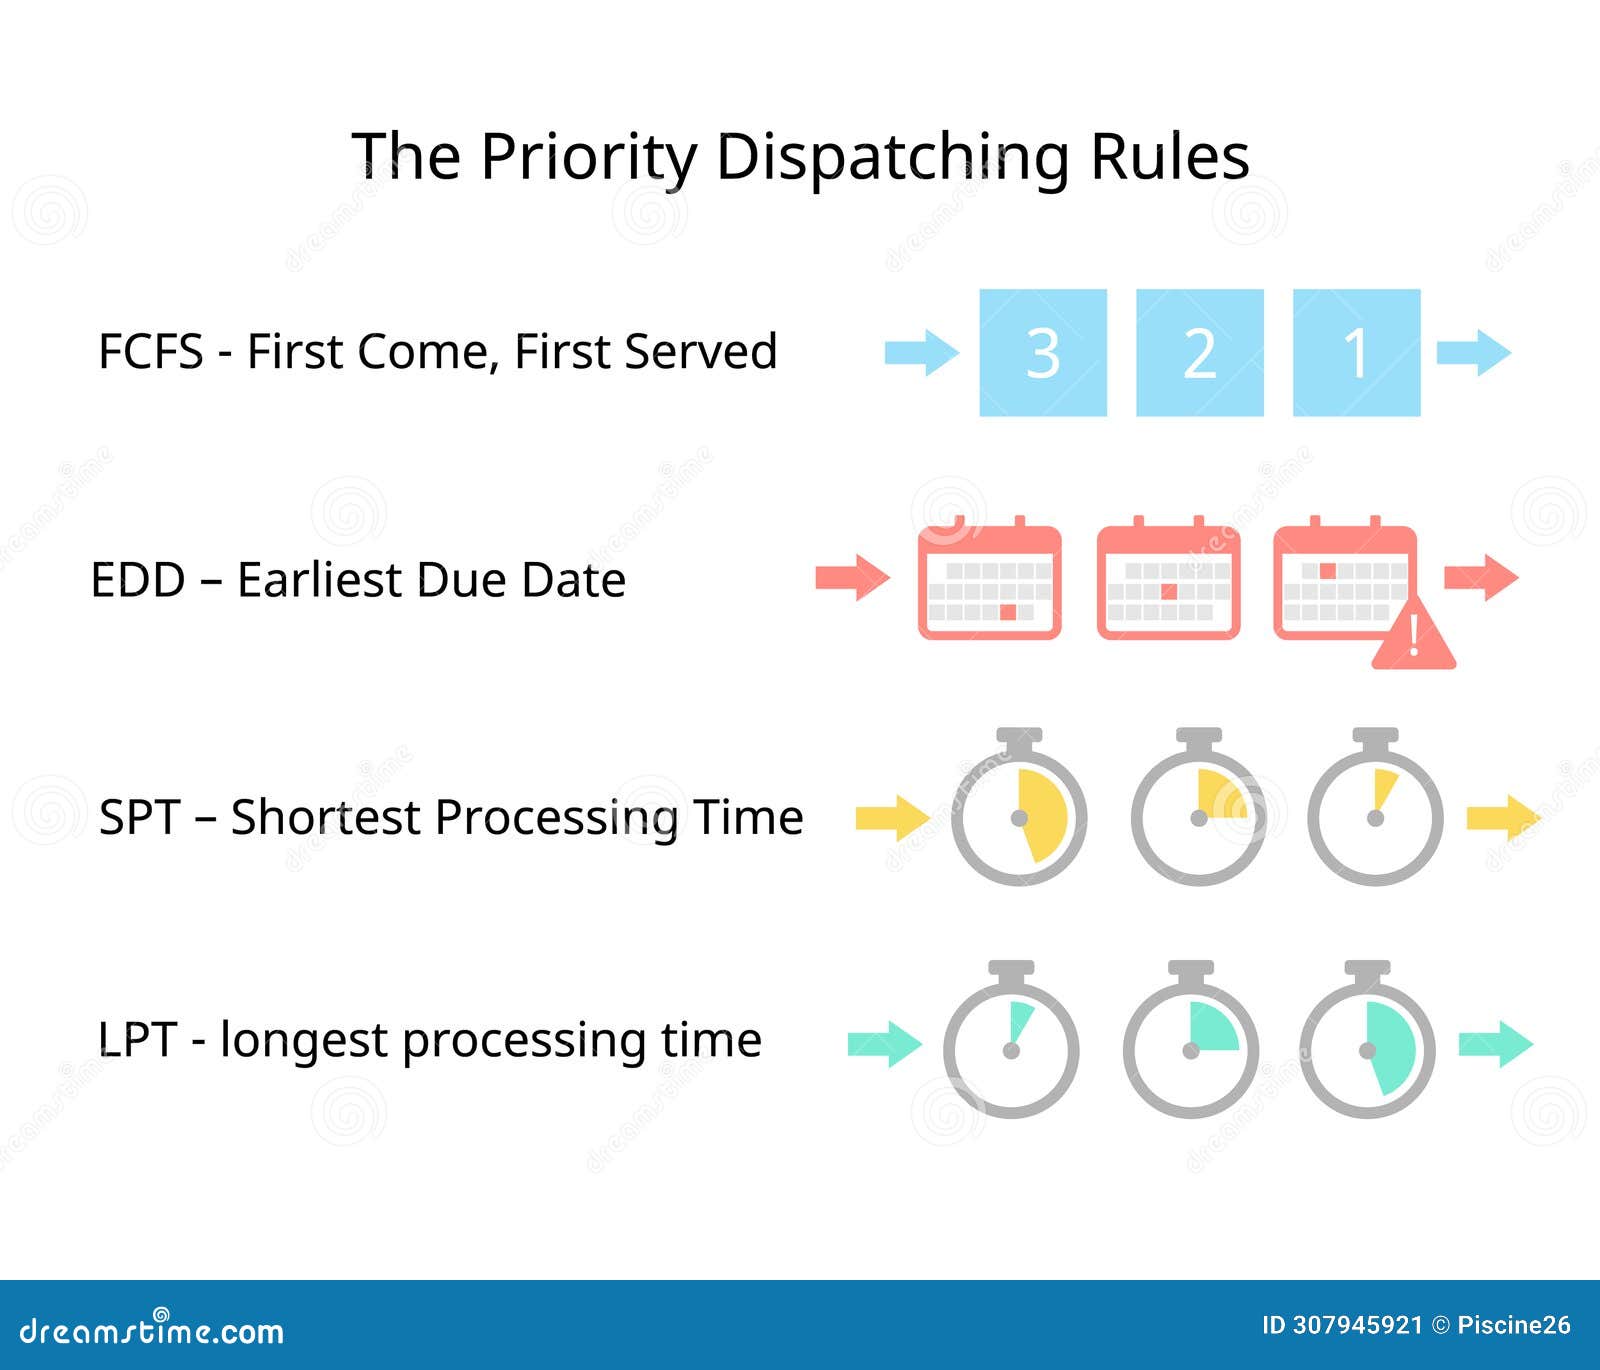 production sequences of priority dispatching rules of fcfs, edd, spt, lpt